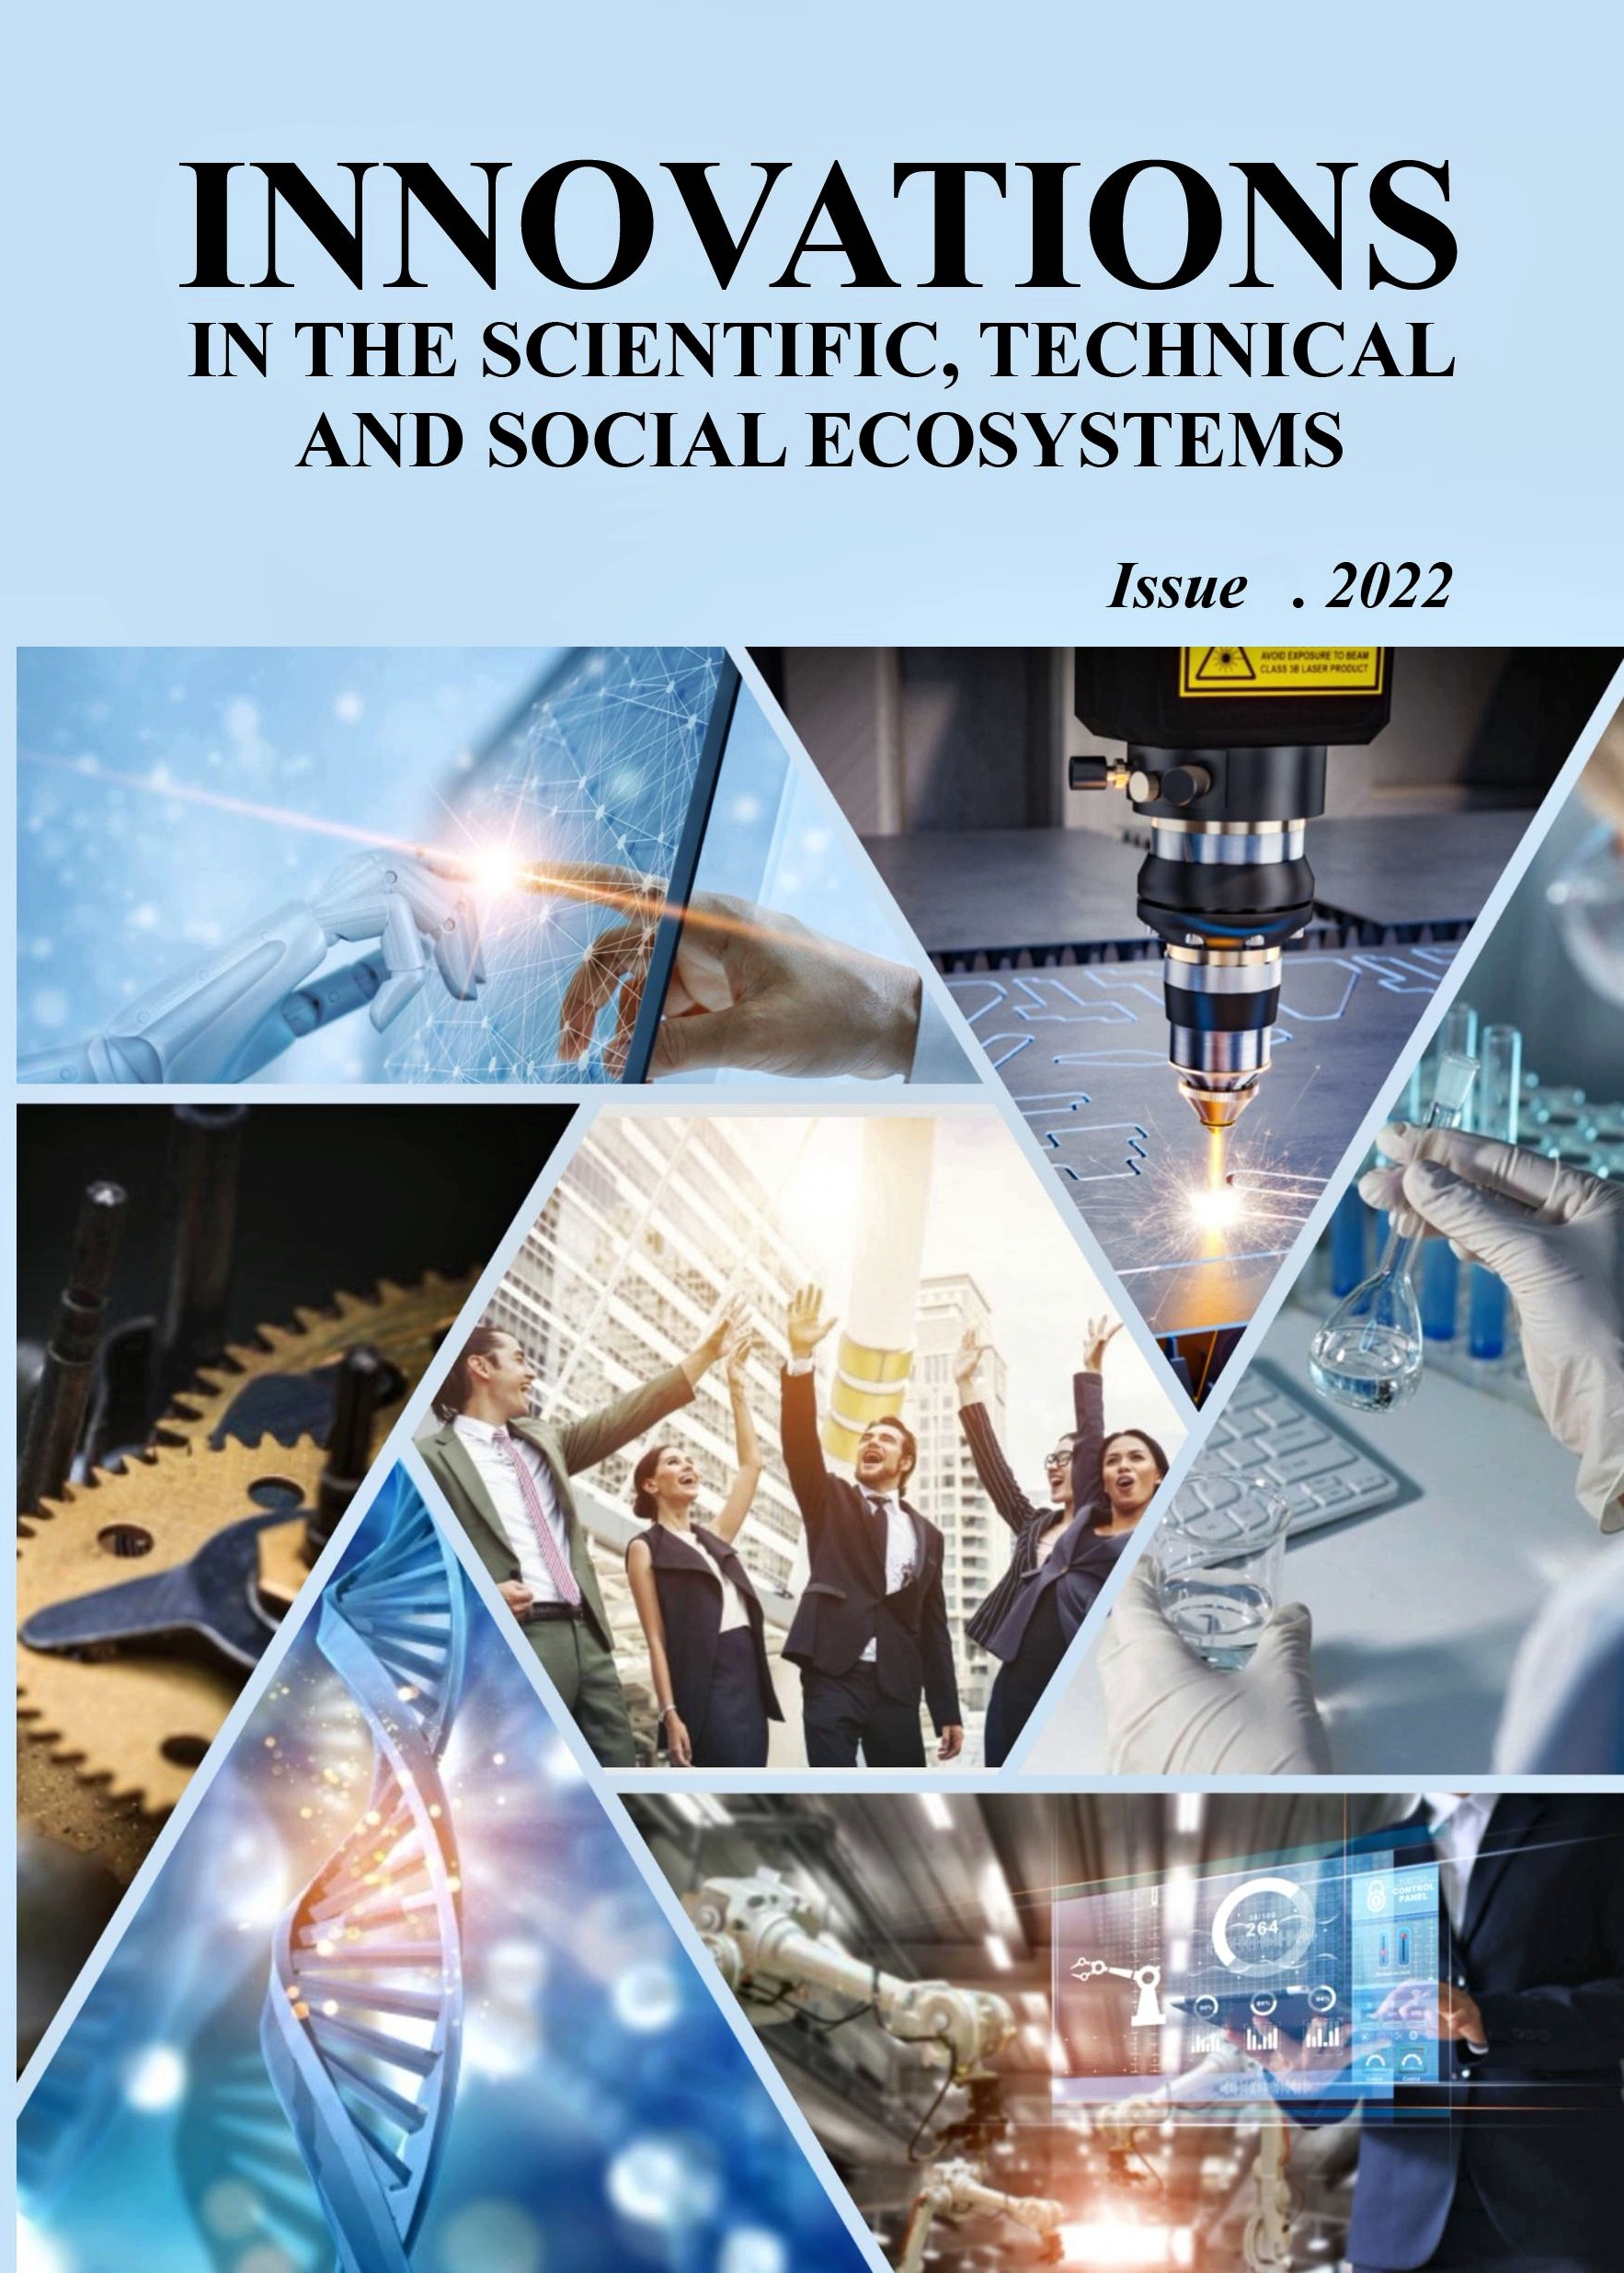 					View Vol. 1 No. 5 (2022): INNOVATIONS IN THE SCIENTIFIC, TECHNICAL AND SOCIAL ECOSYSTEMS
				